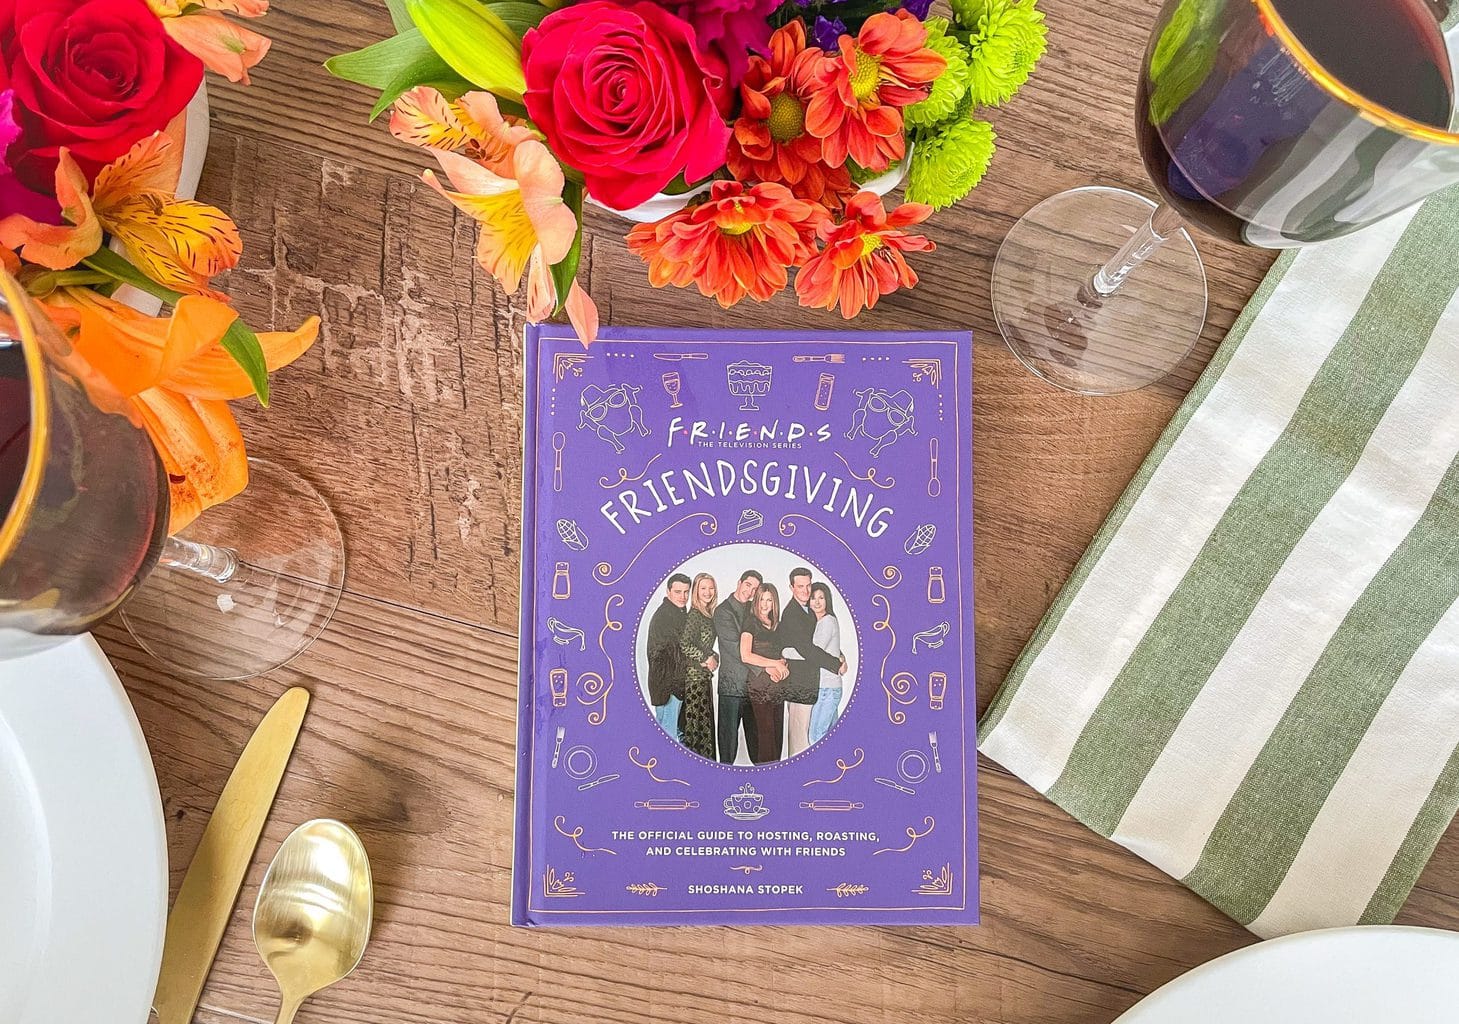 Purple Friendsgiving book on a table next to a colorful flower centerpiece.